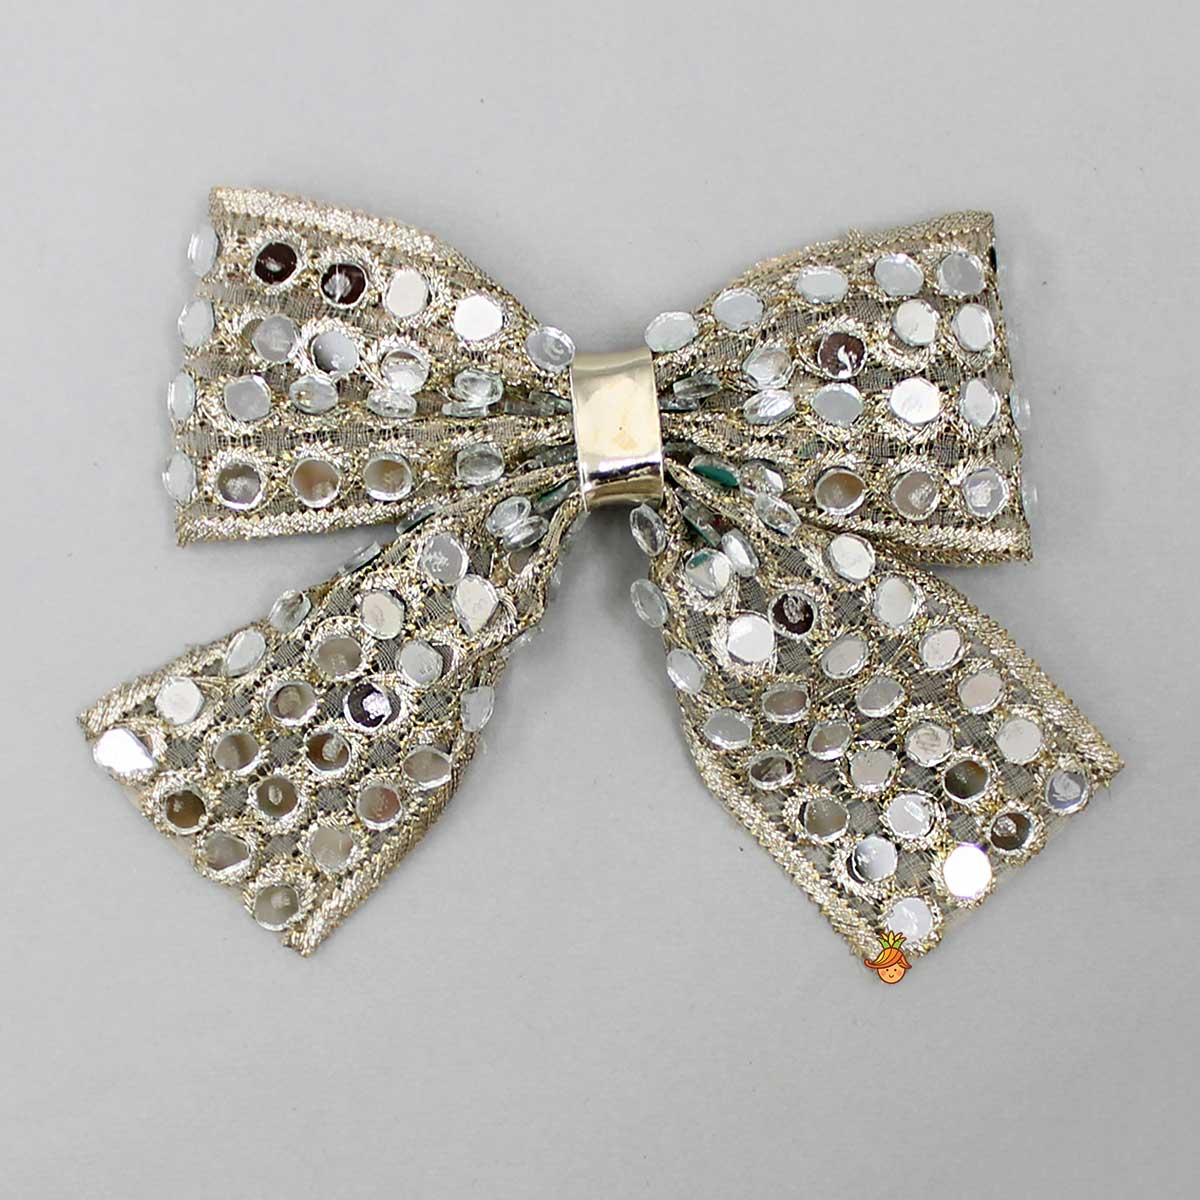 Shiny Mirror Embellished Bowie Hair Clip